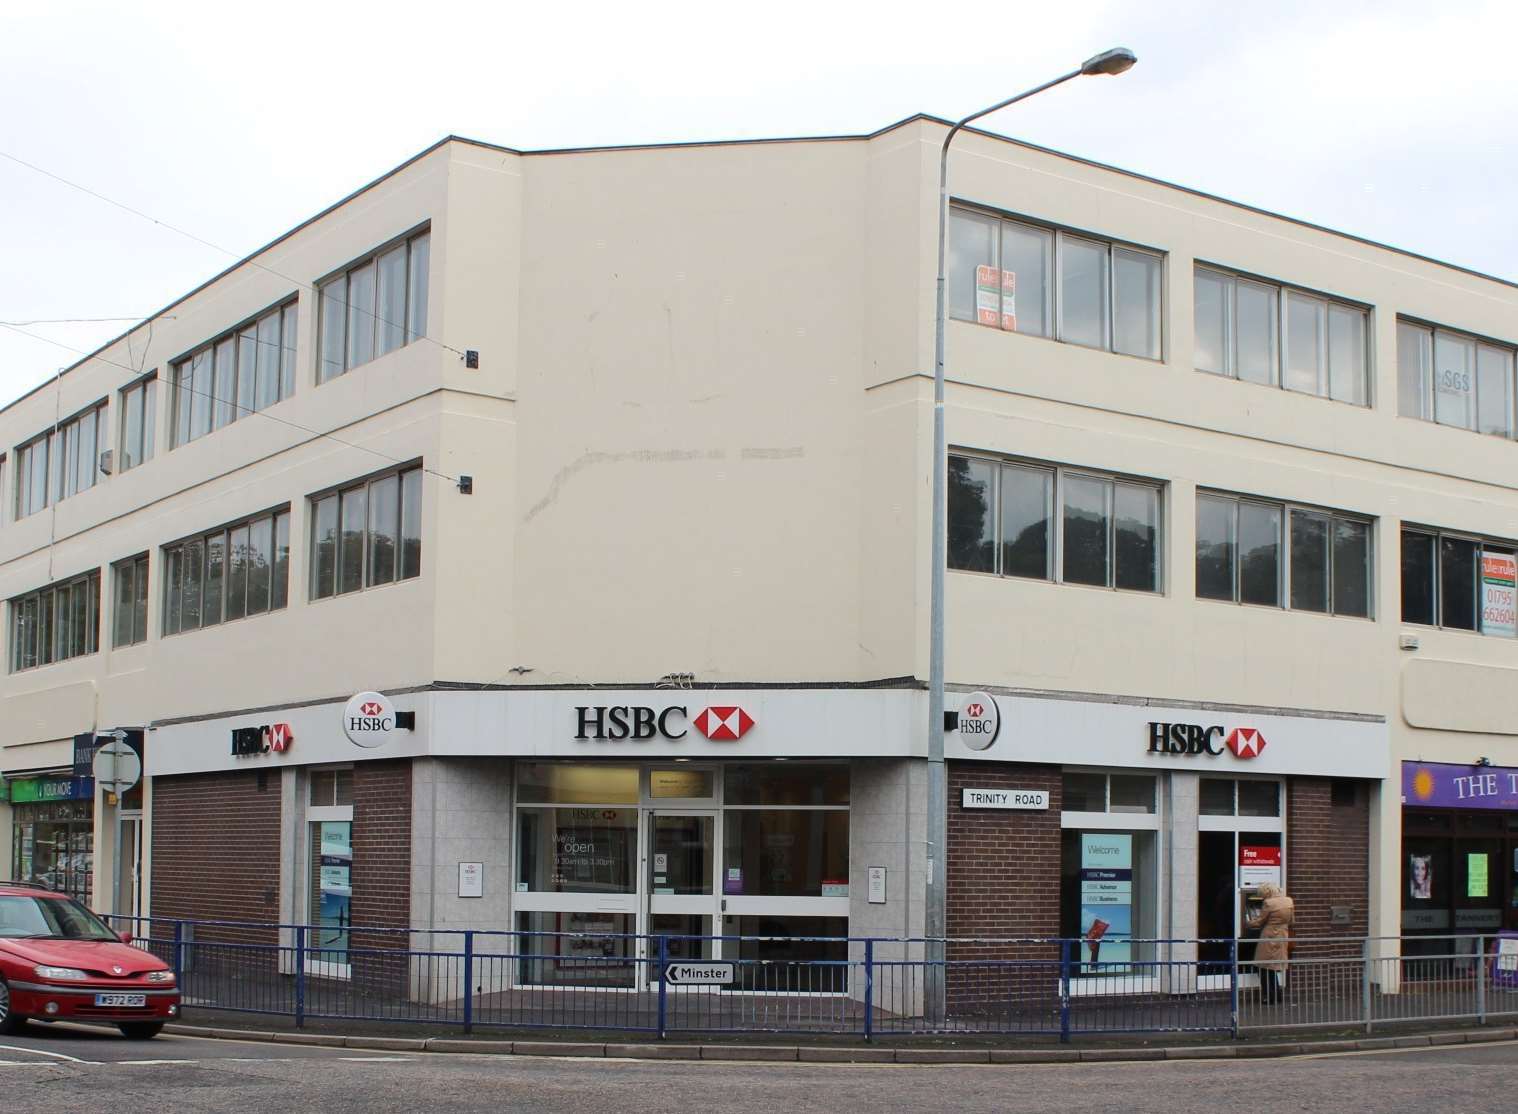 The old HSBC bank building in Sheerness could end up as a martial arts centre.